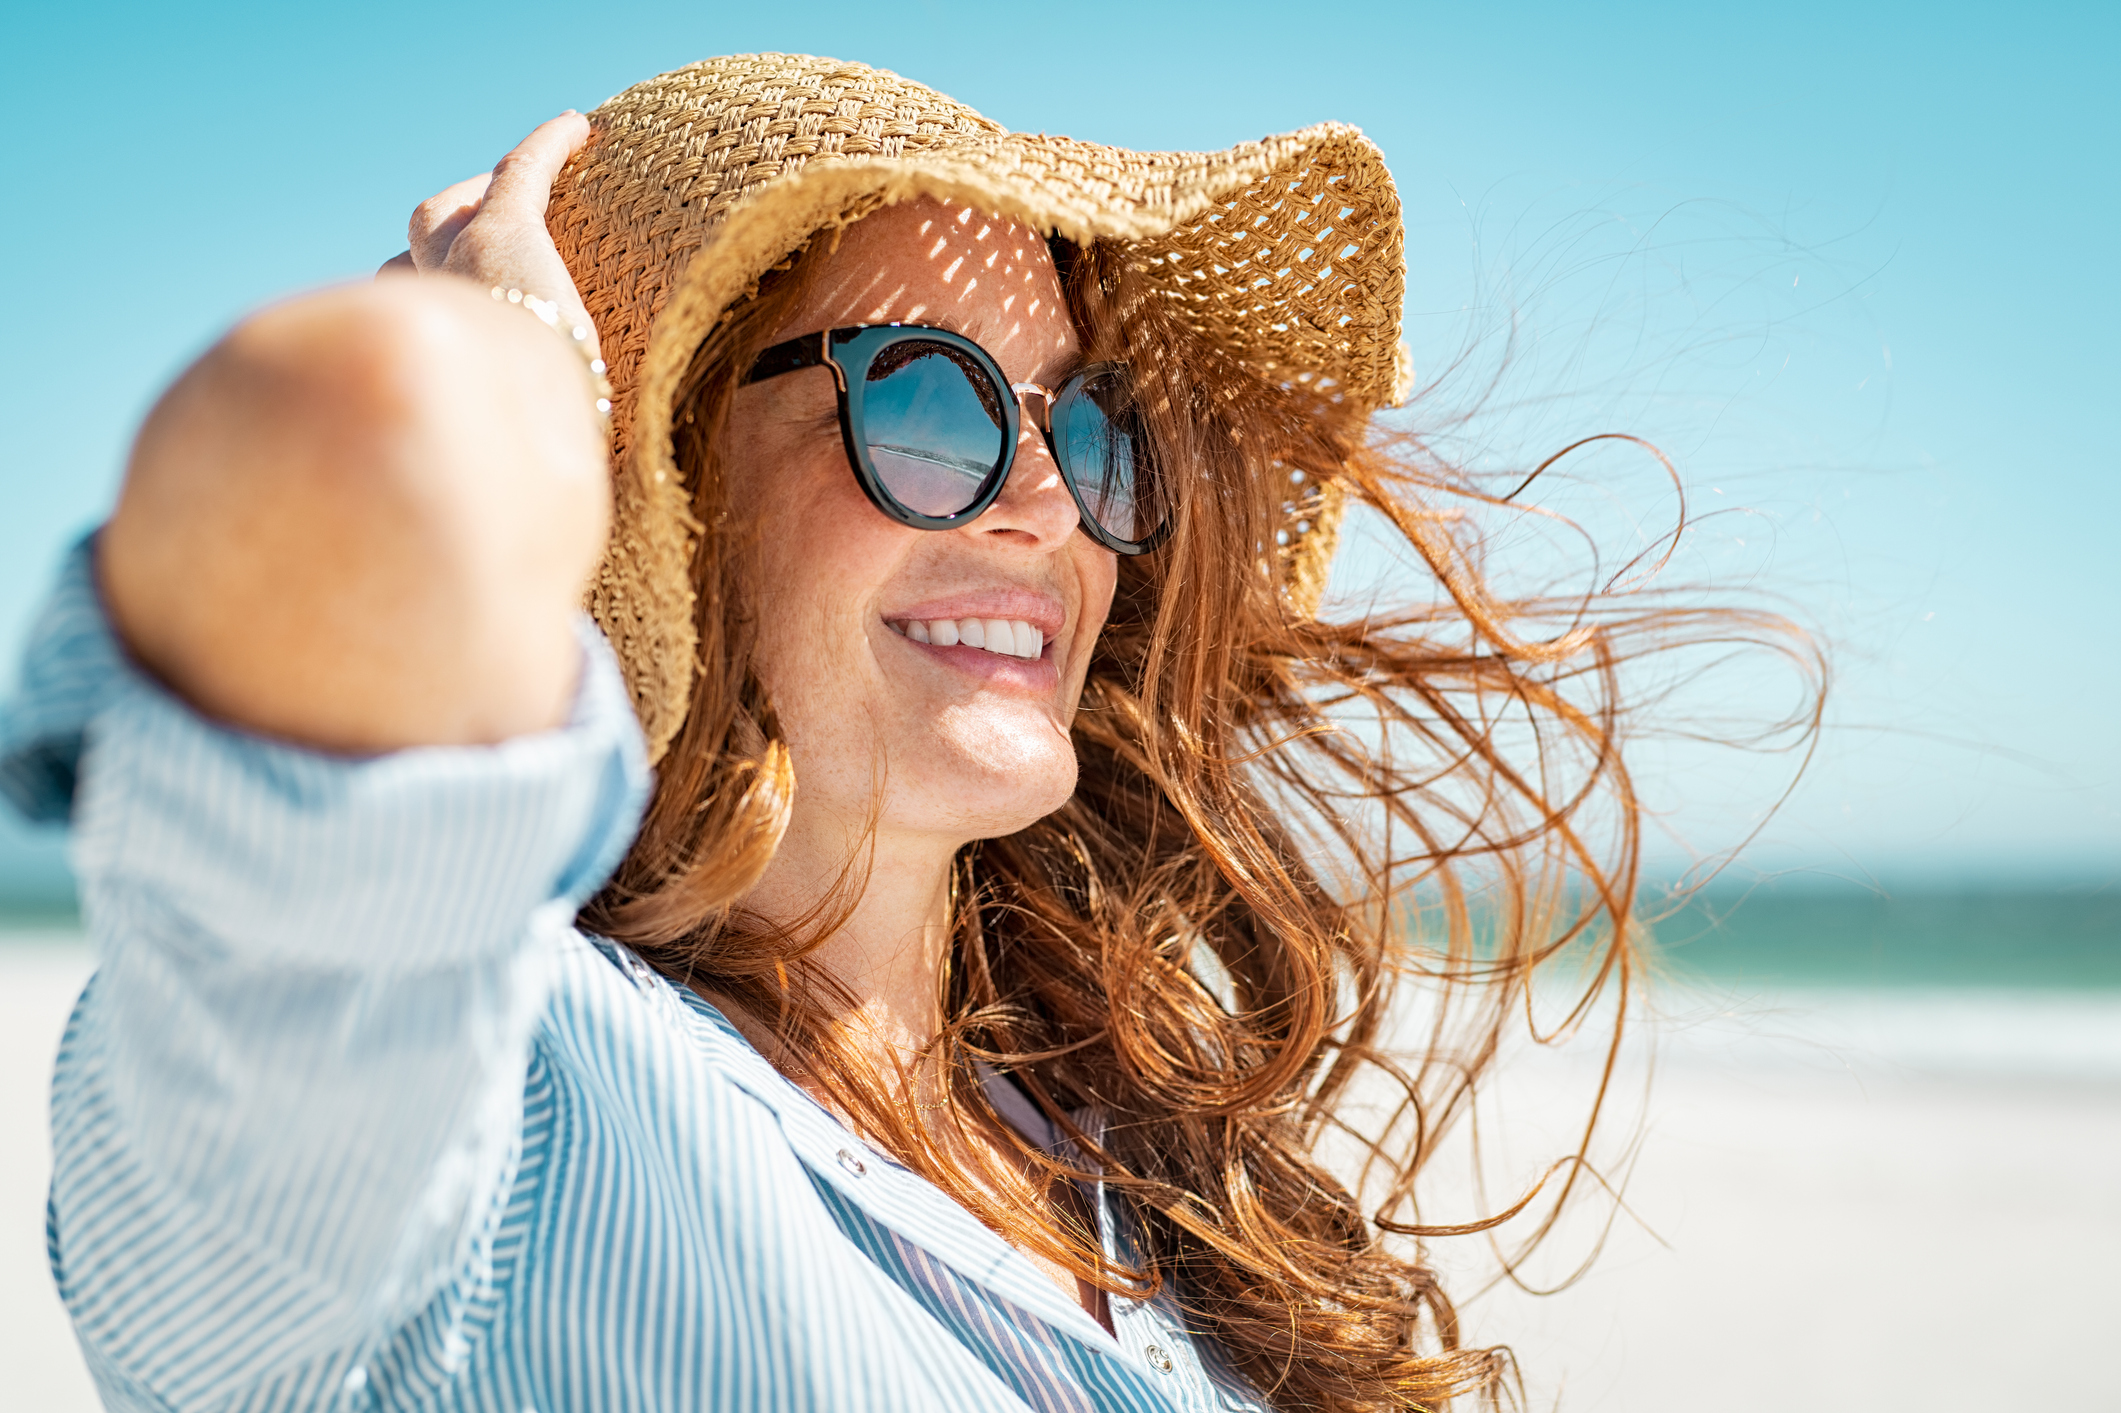 A woman in a hat and sunglasses smiling on the beach